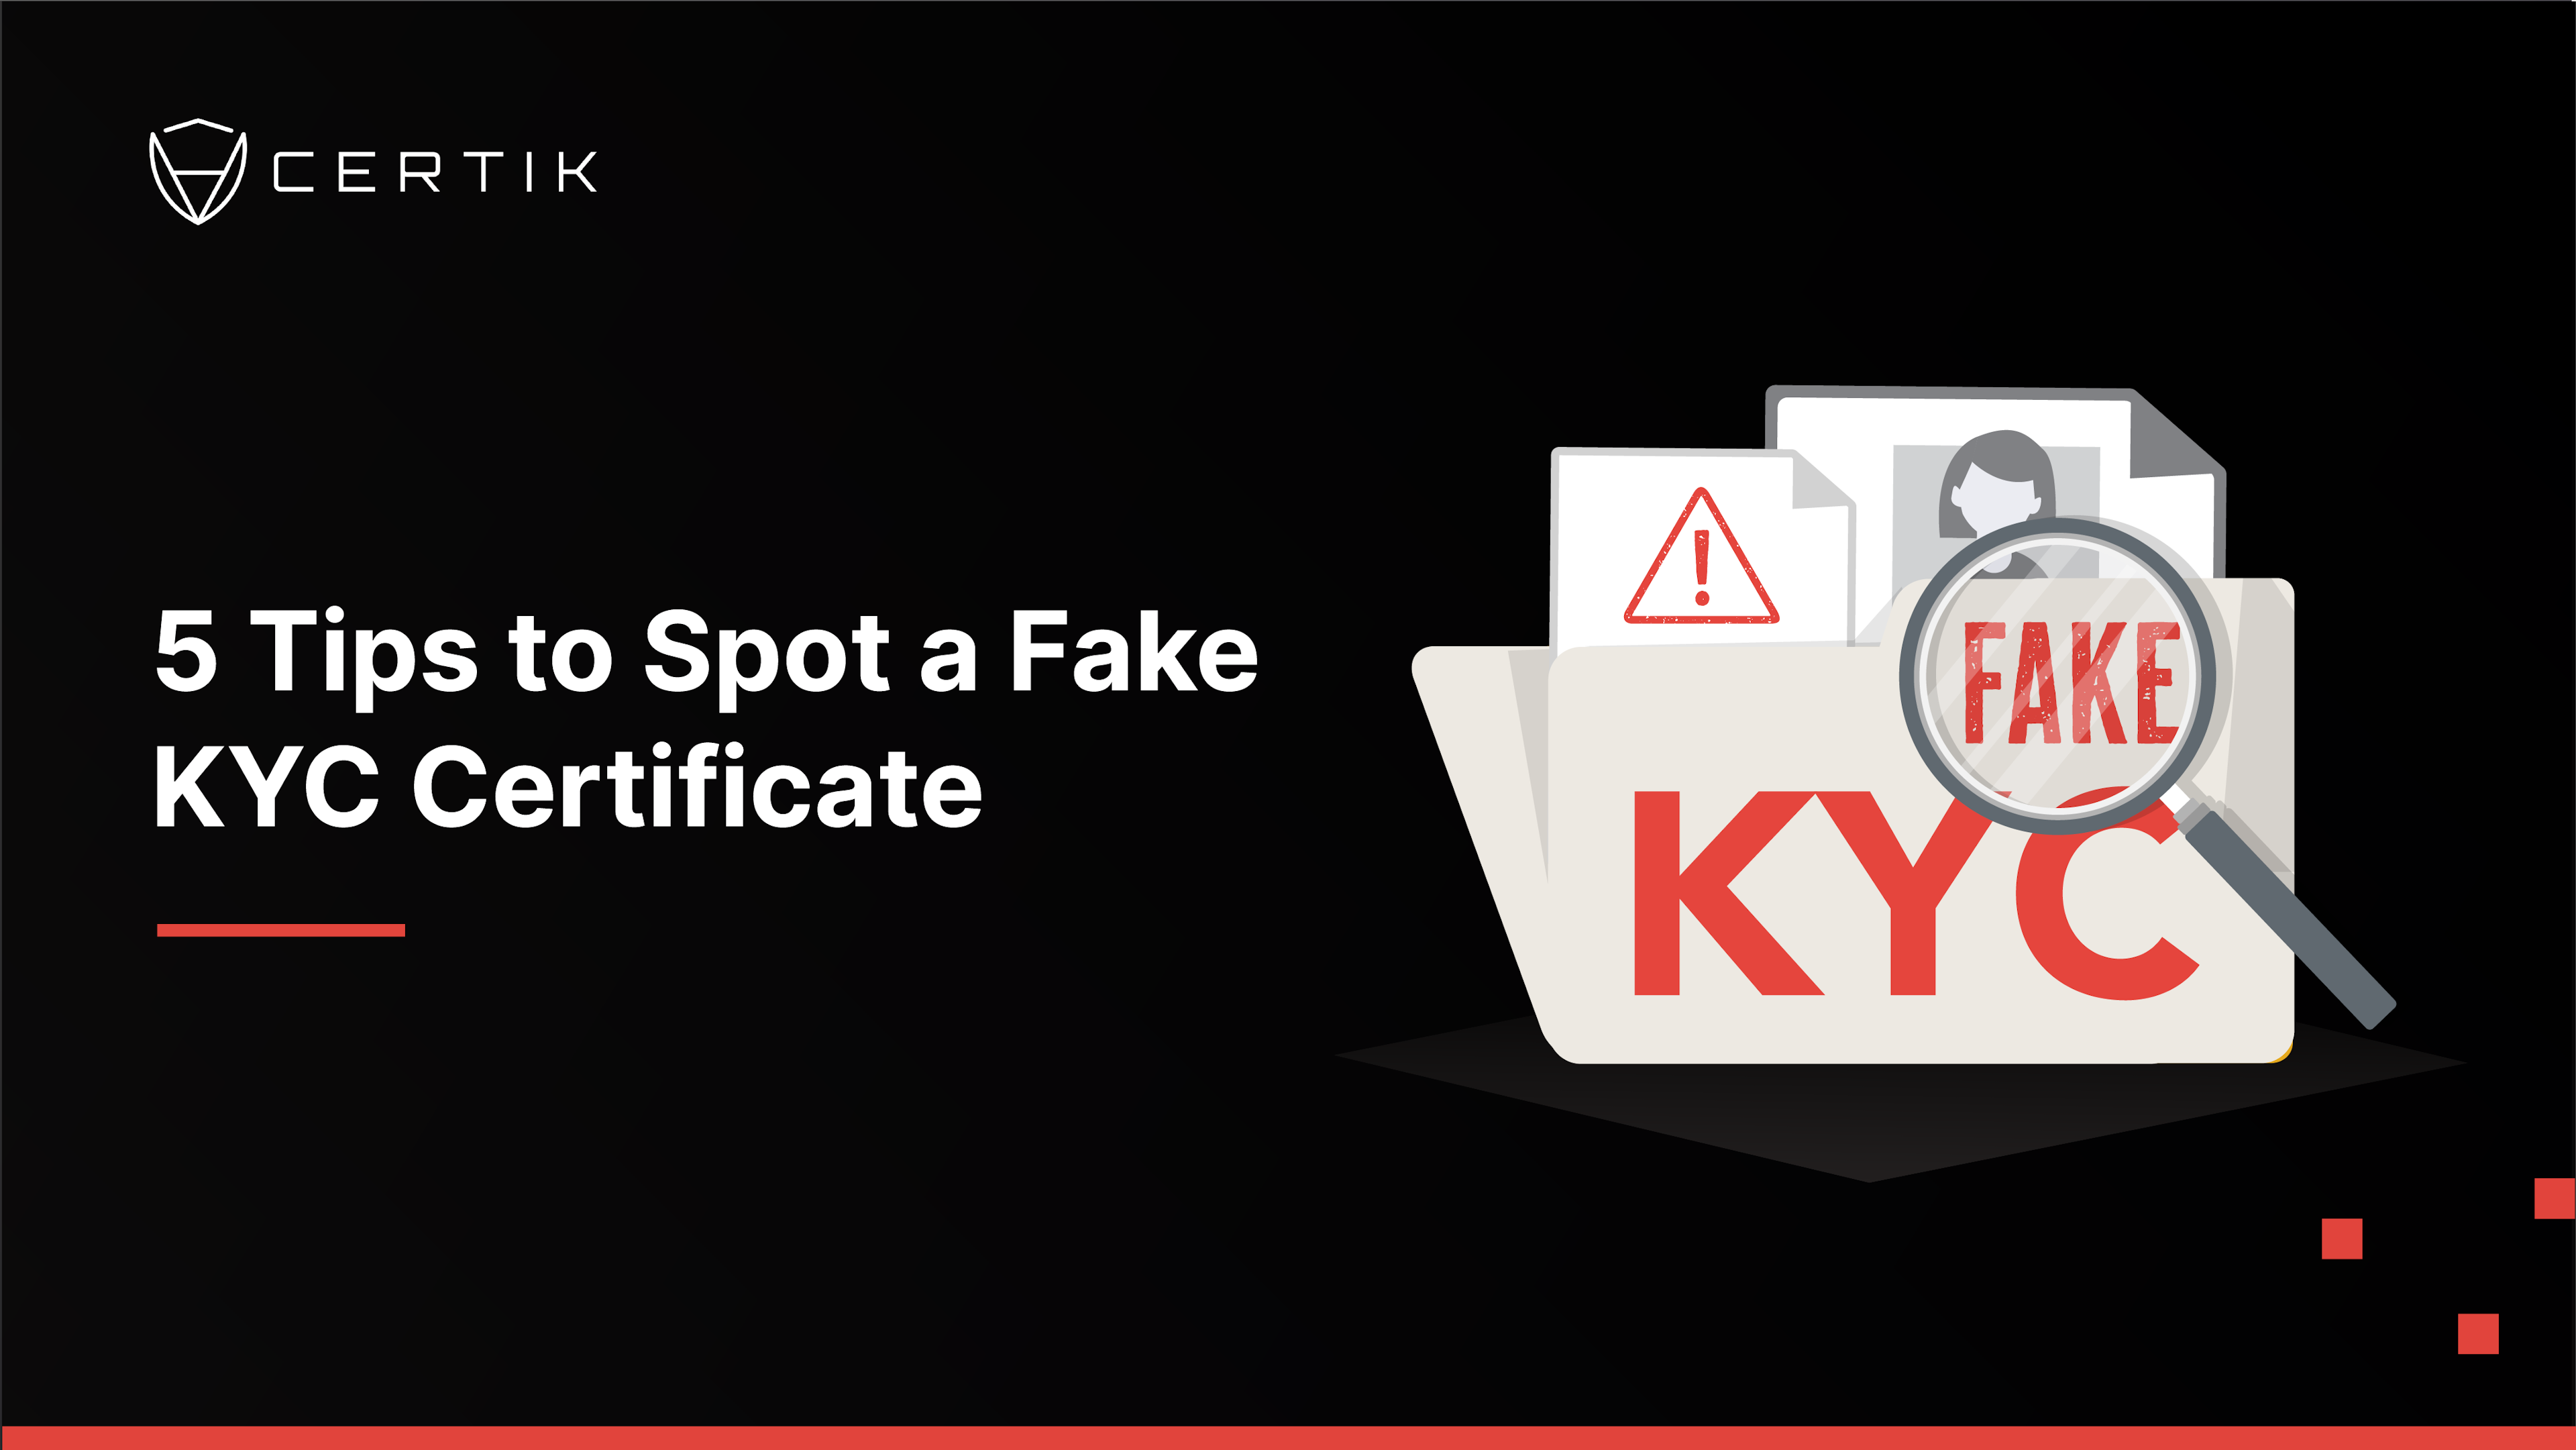 5 Tips to Spot a Fake KYC Certificate